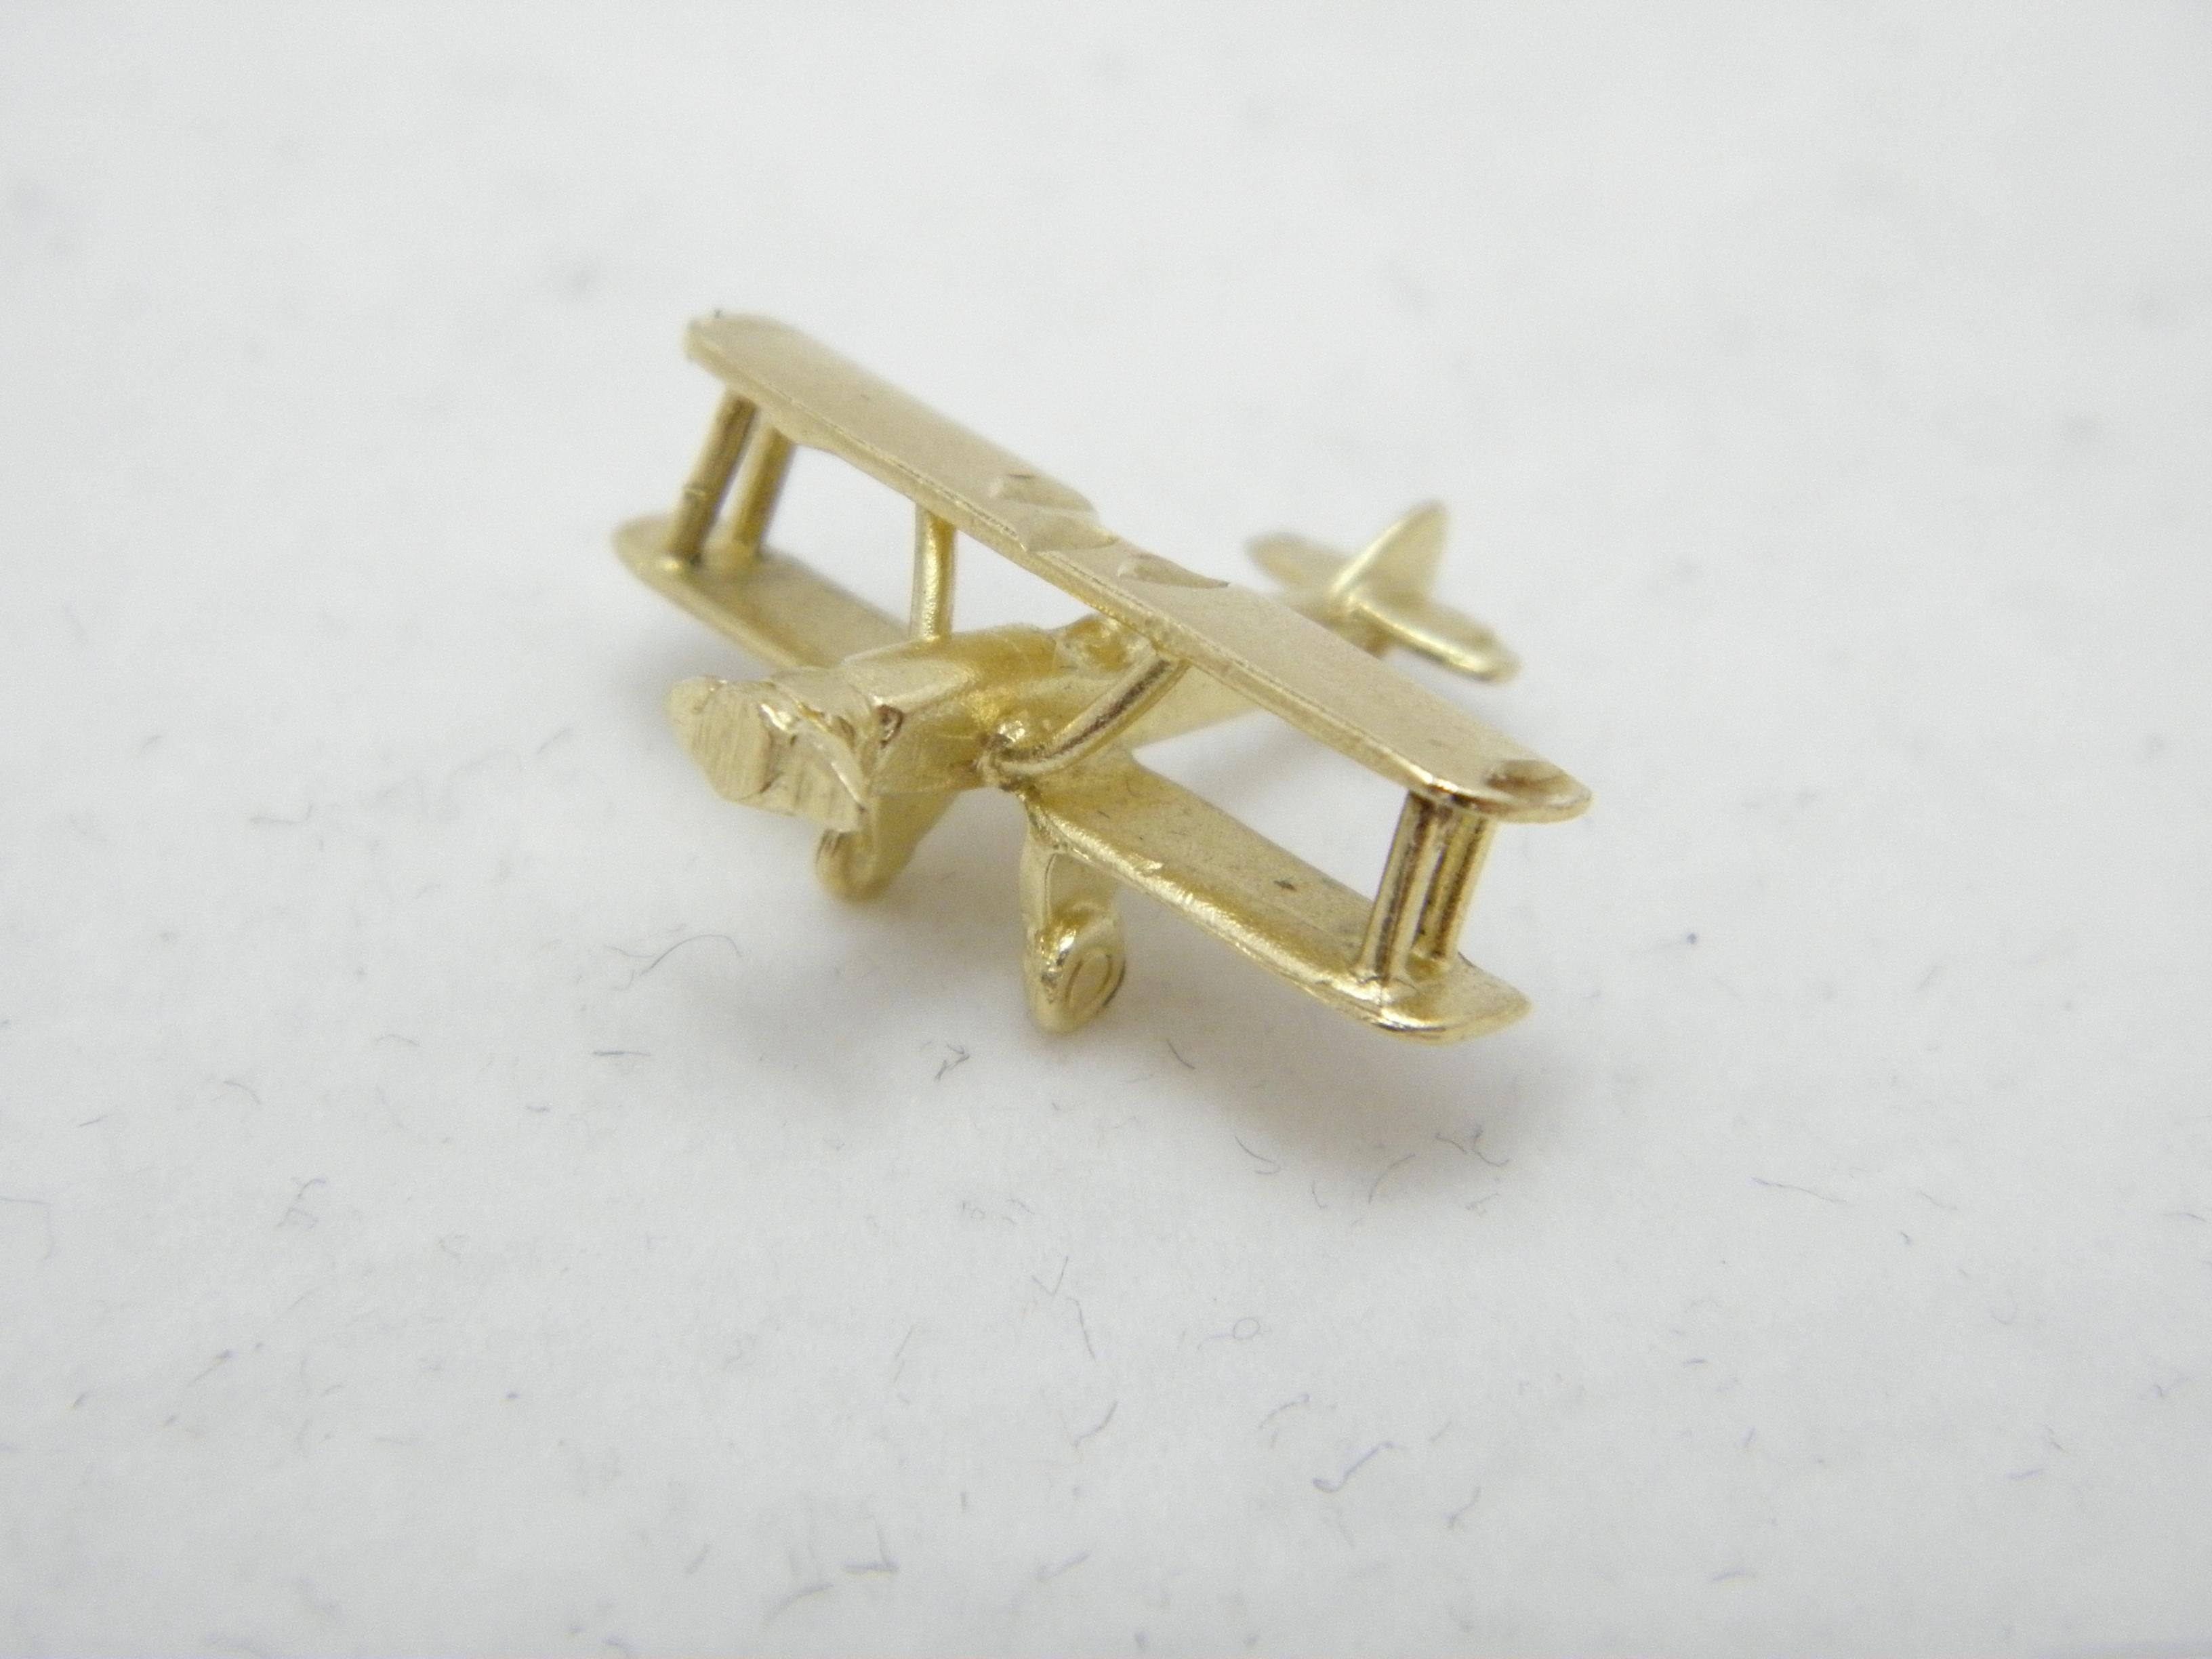 If you have landed on this page then you have an eye for beauty.

On offer is this gorgeous

RARE 14CT SOLID GOLD MODEL AEROPLANE BIPLANE CHARM FOB

DETAILS
Material: 14ct (585/000) Solid Thick Yellow Gold
Style: Highly detailed model of a biplane,